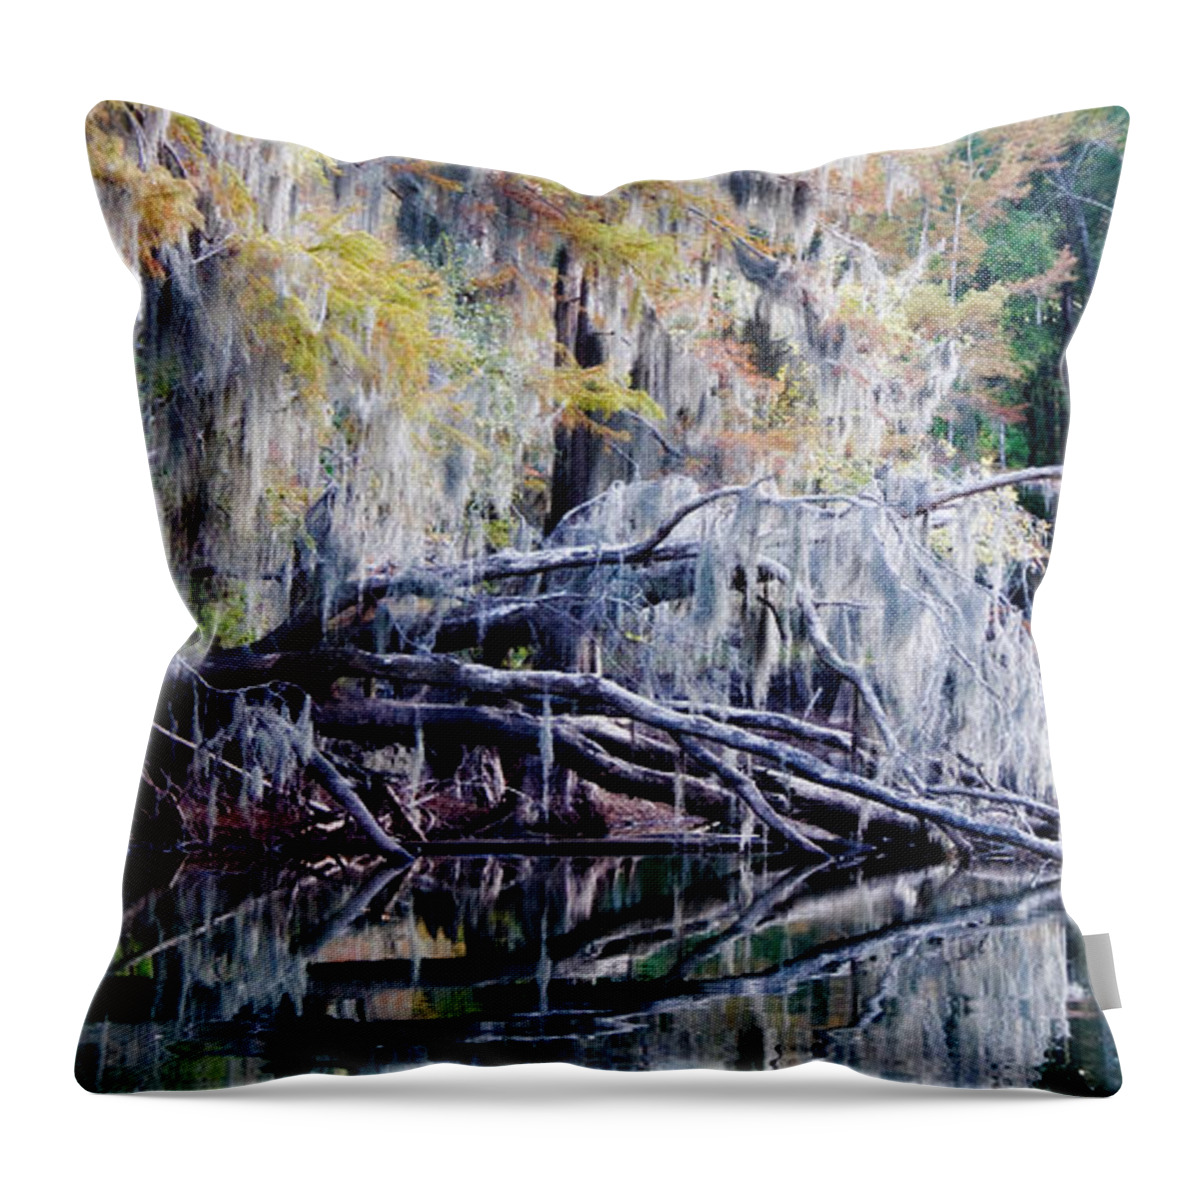 Uncertain Throw Pillow featuring the photograph Fallen Reflection by Lana Trussell